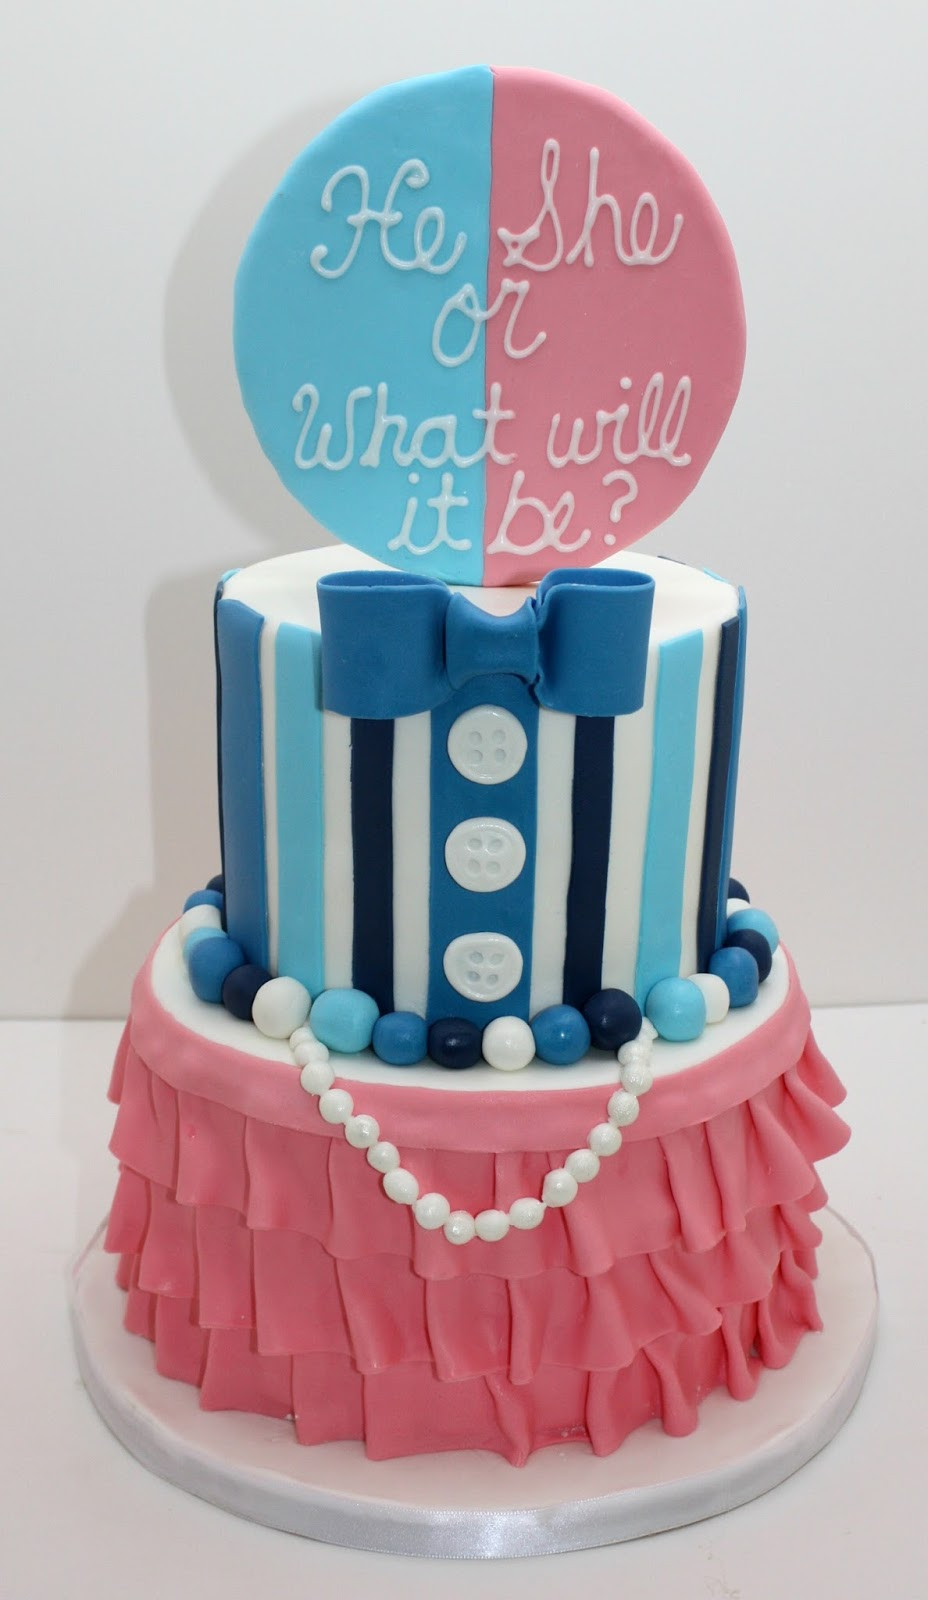 Cake Ideas For Gender Reveal Party
 Sweet Eats Cakes Gender Reveal Party